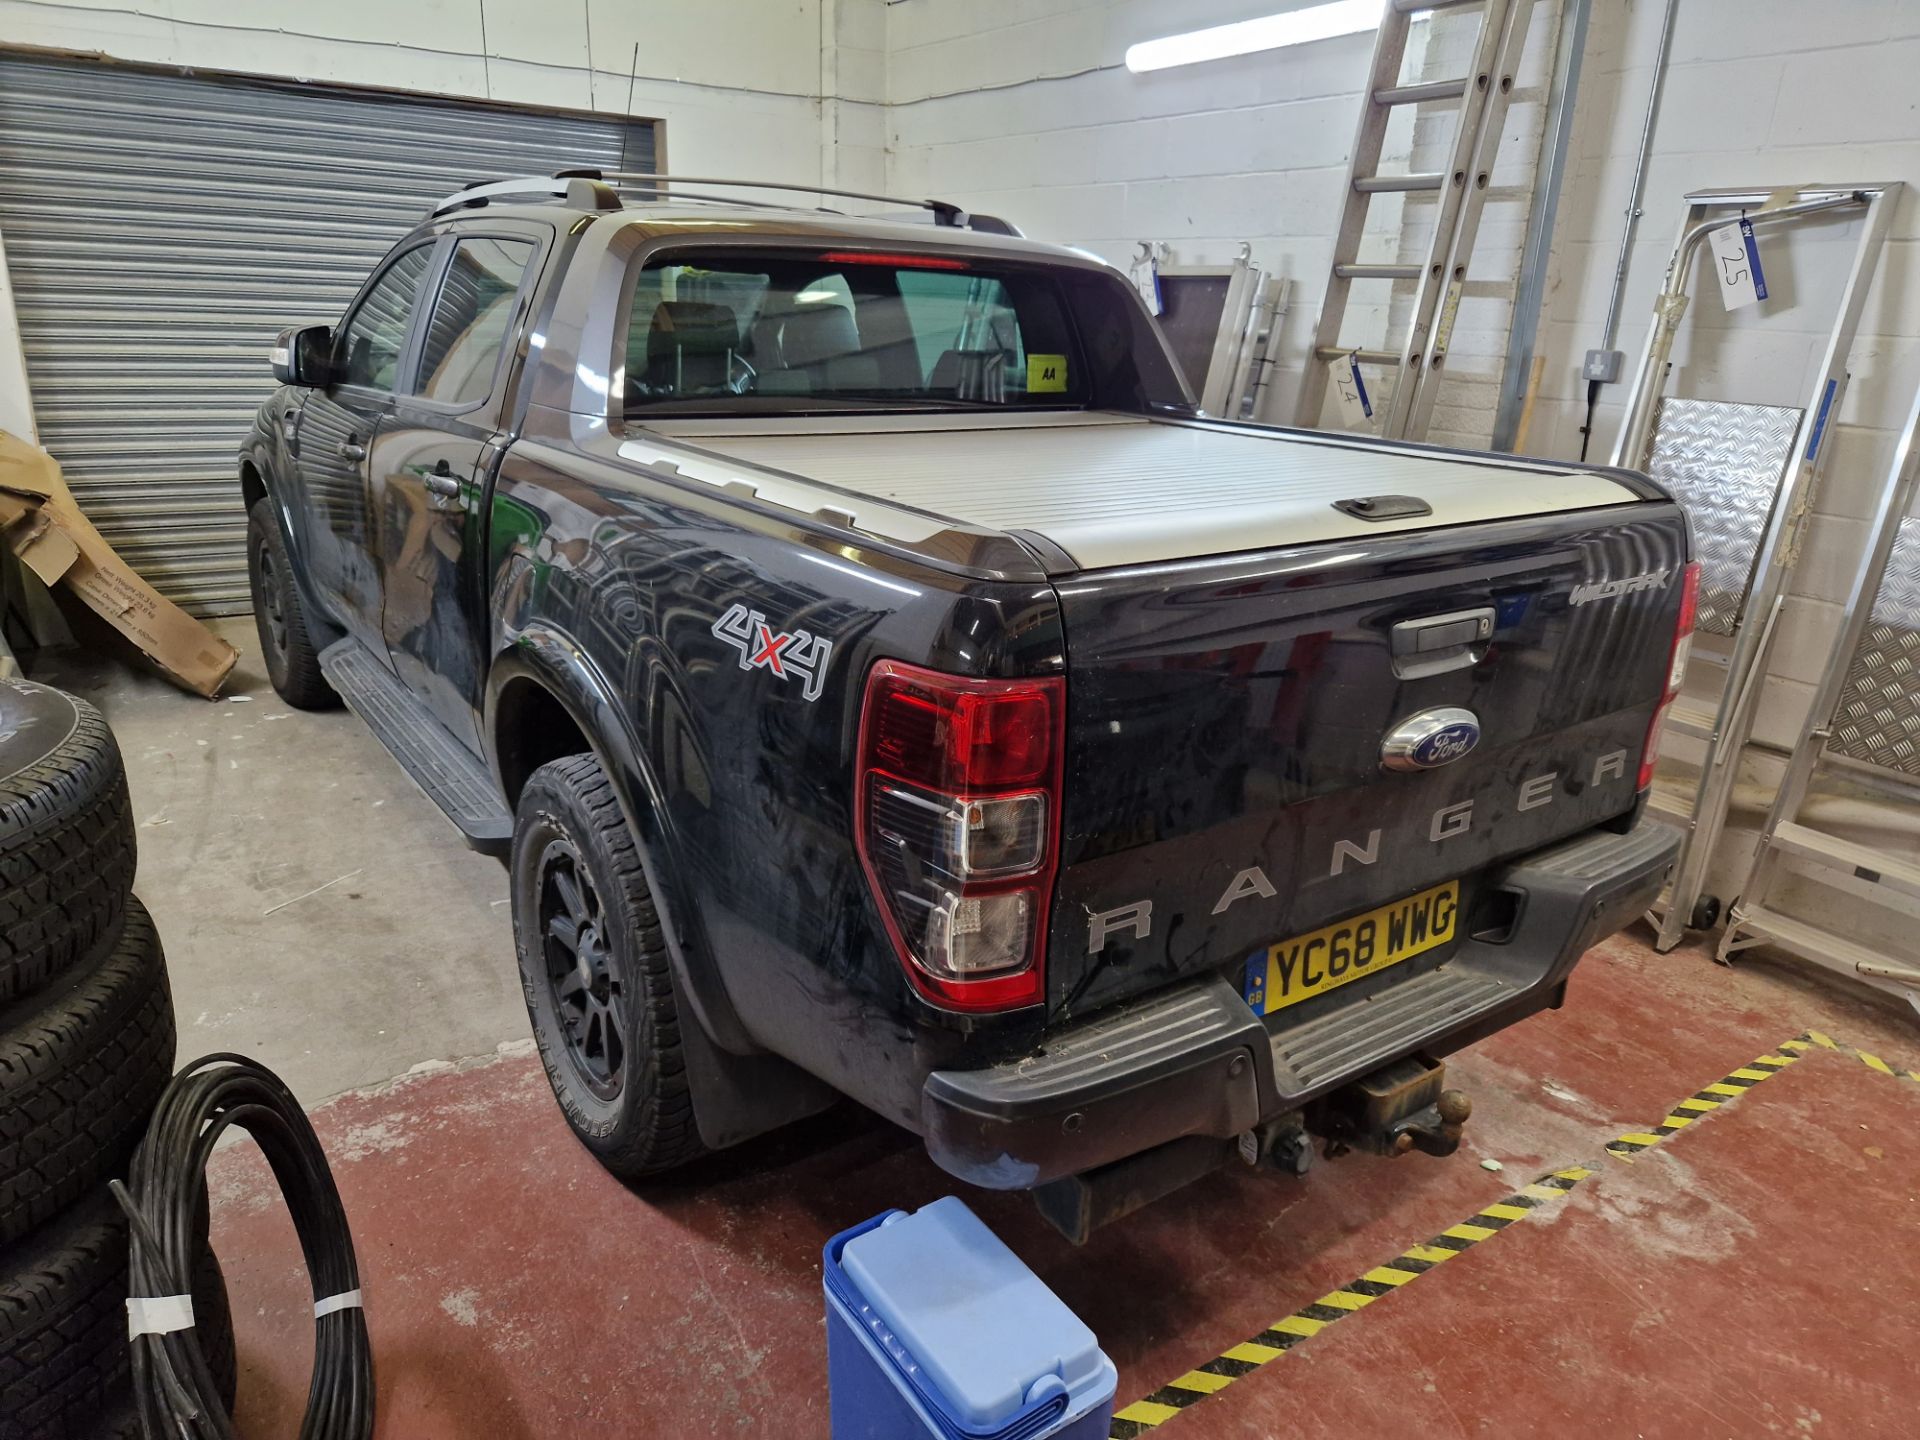 Ford Ranger Wildtrak 3.2 TDCi 200 Auto Diesel Double Cab Pick Up, registration no. YC68 WWG, date - Image 3 of 10